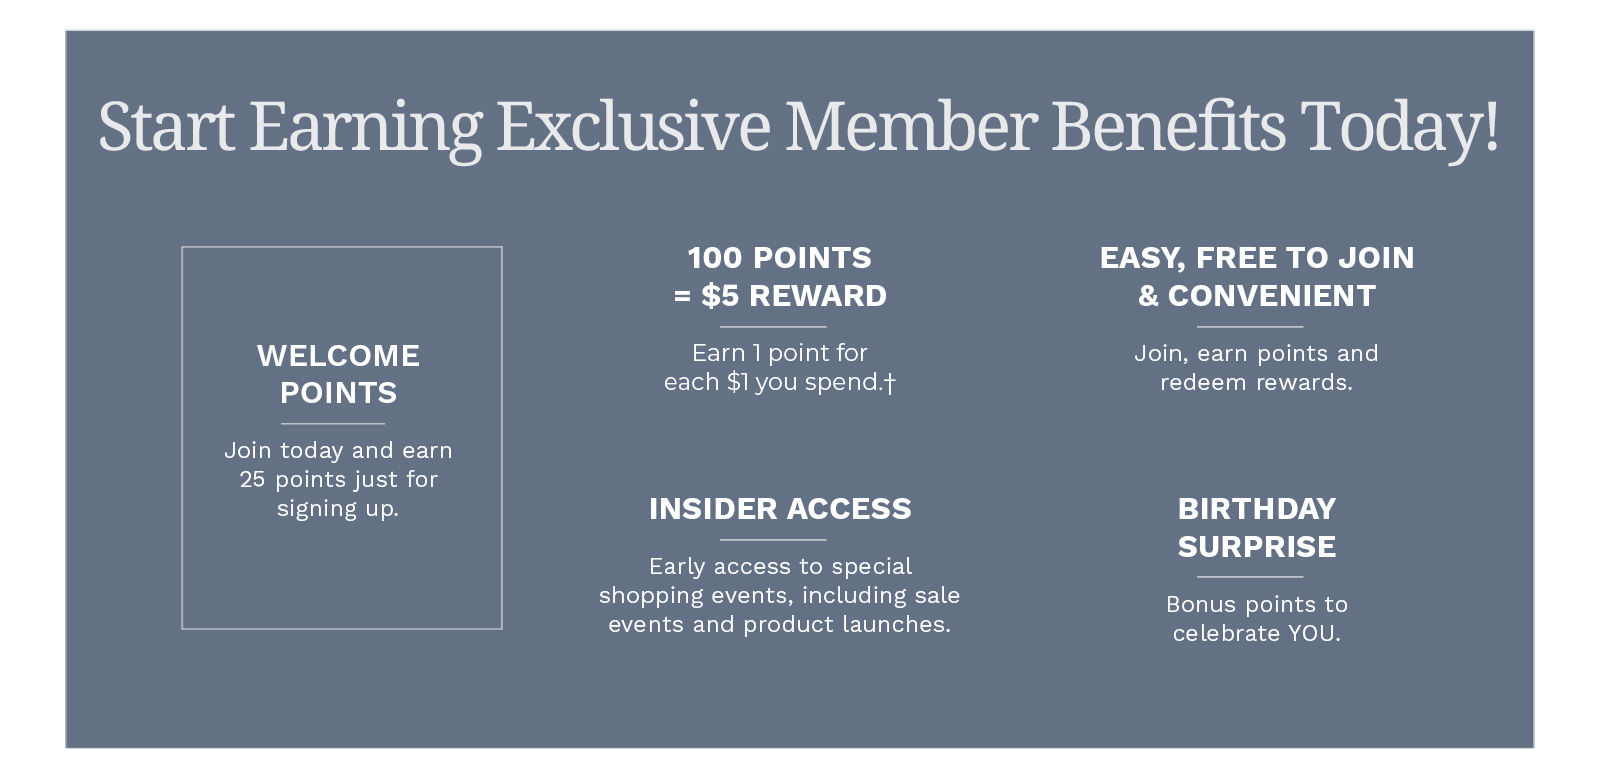 Start earning Exclusive Member Benefits today! Welcome Points: Join today and earn 25 points just for signing up. 100 Points = $5 Reward: Earn 1 point for each $1 you spend.† Easy, Free to Join & Convenient: Join, earn points and redeem rewards. Insider Access: Early access to special shopping events, including sale events and product launches. Birthday Surprise: Bonus points to celebrate YOU. Thank you for being a part of the Blair family. We're looking forward to having you join the club! Join for Free